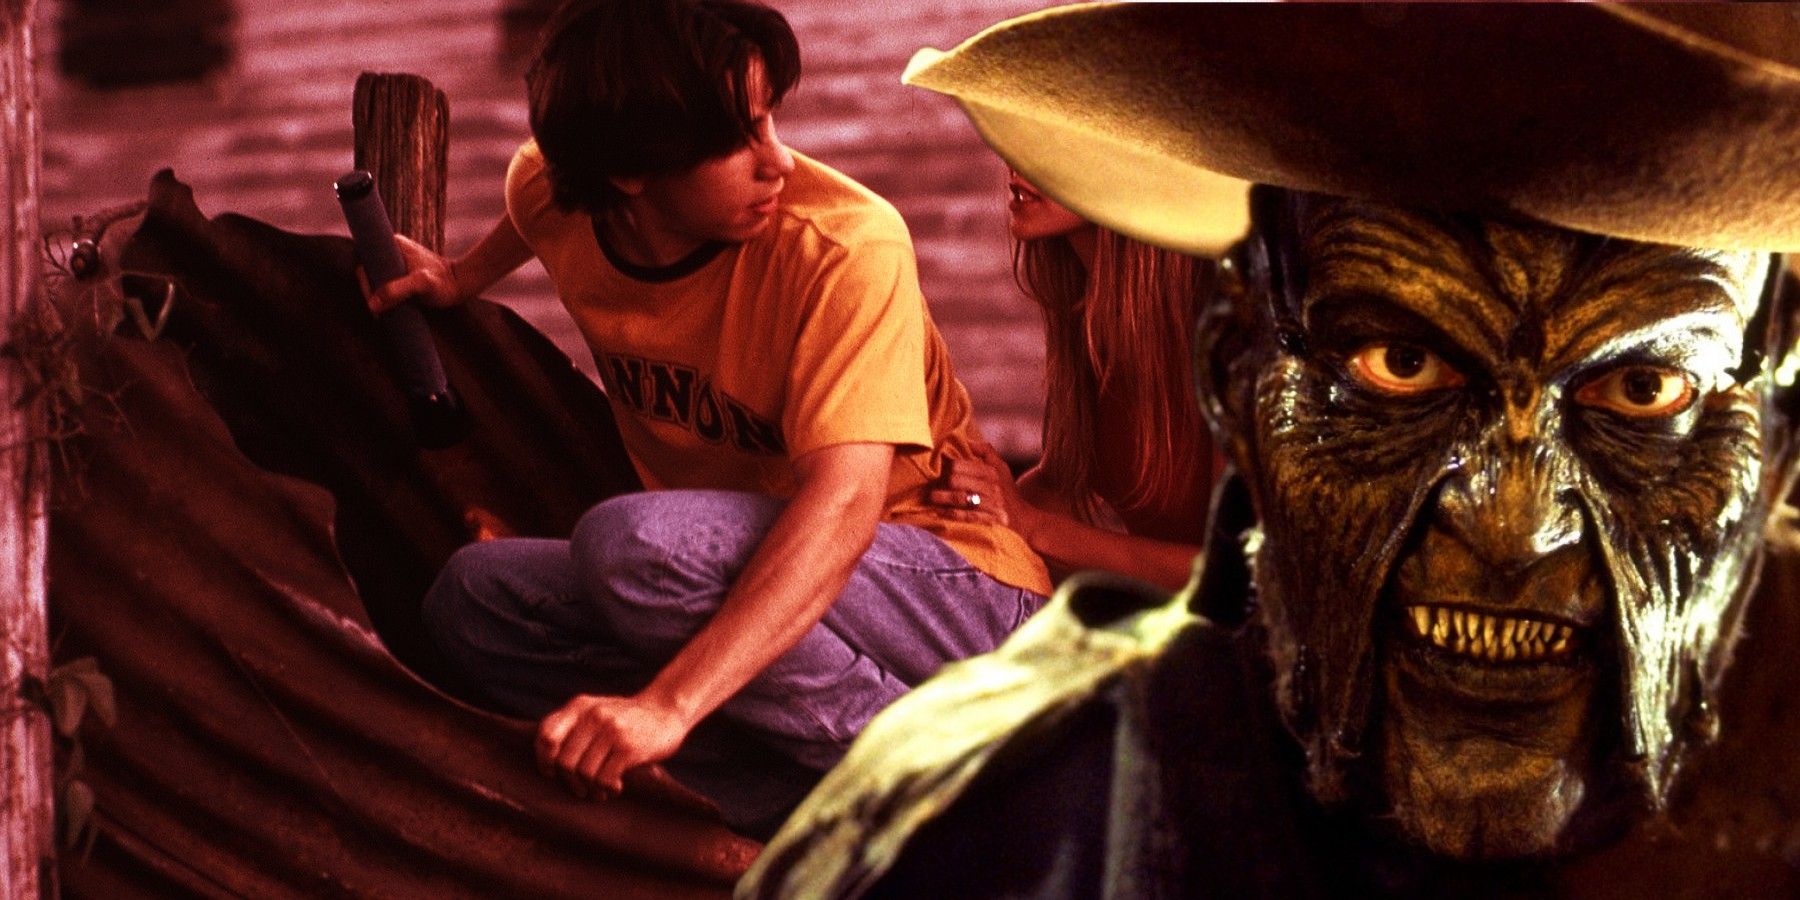 Custom image of Justin Long and the Creeper in Jeepers Creepers